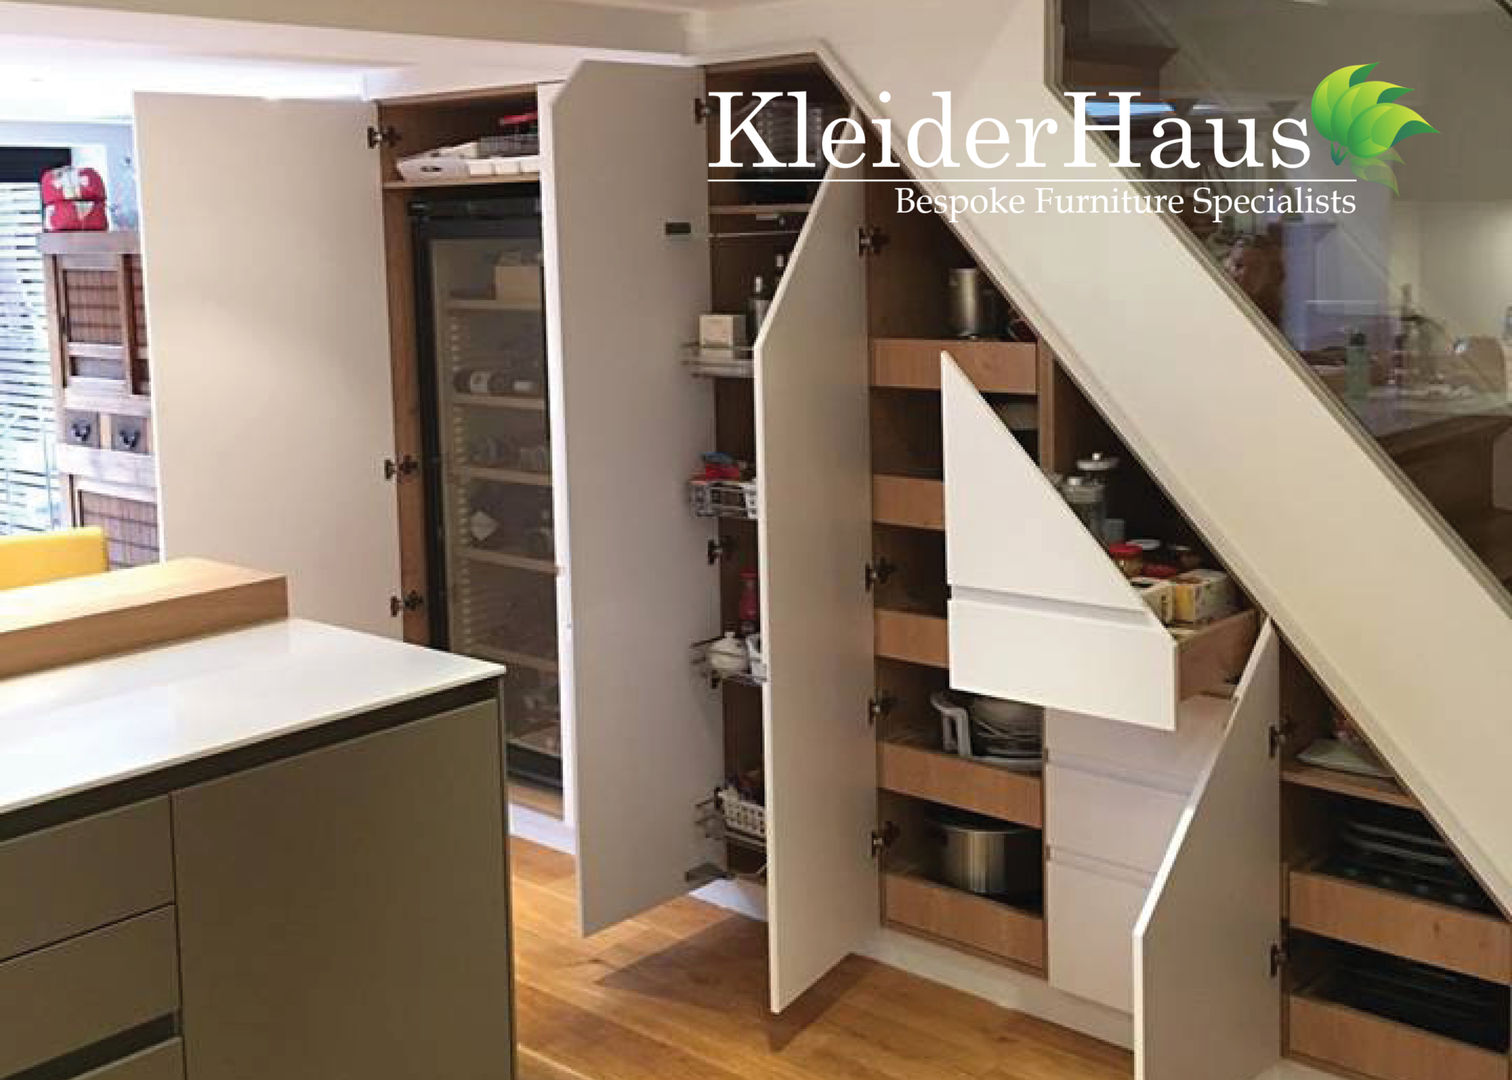 Kitchen Understairs unit - Finally project Completed by Kleiderhaus Kleiderhaus ltd Nowoczesna kuchnia understairs,kitchen understairs,kitchen,fitted kitchen,utility,made to measure,awkward space,bespoke kitchen,joinery,kitchen remodeling,custom made,under-stairs